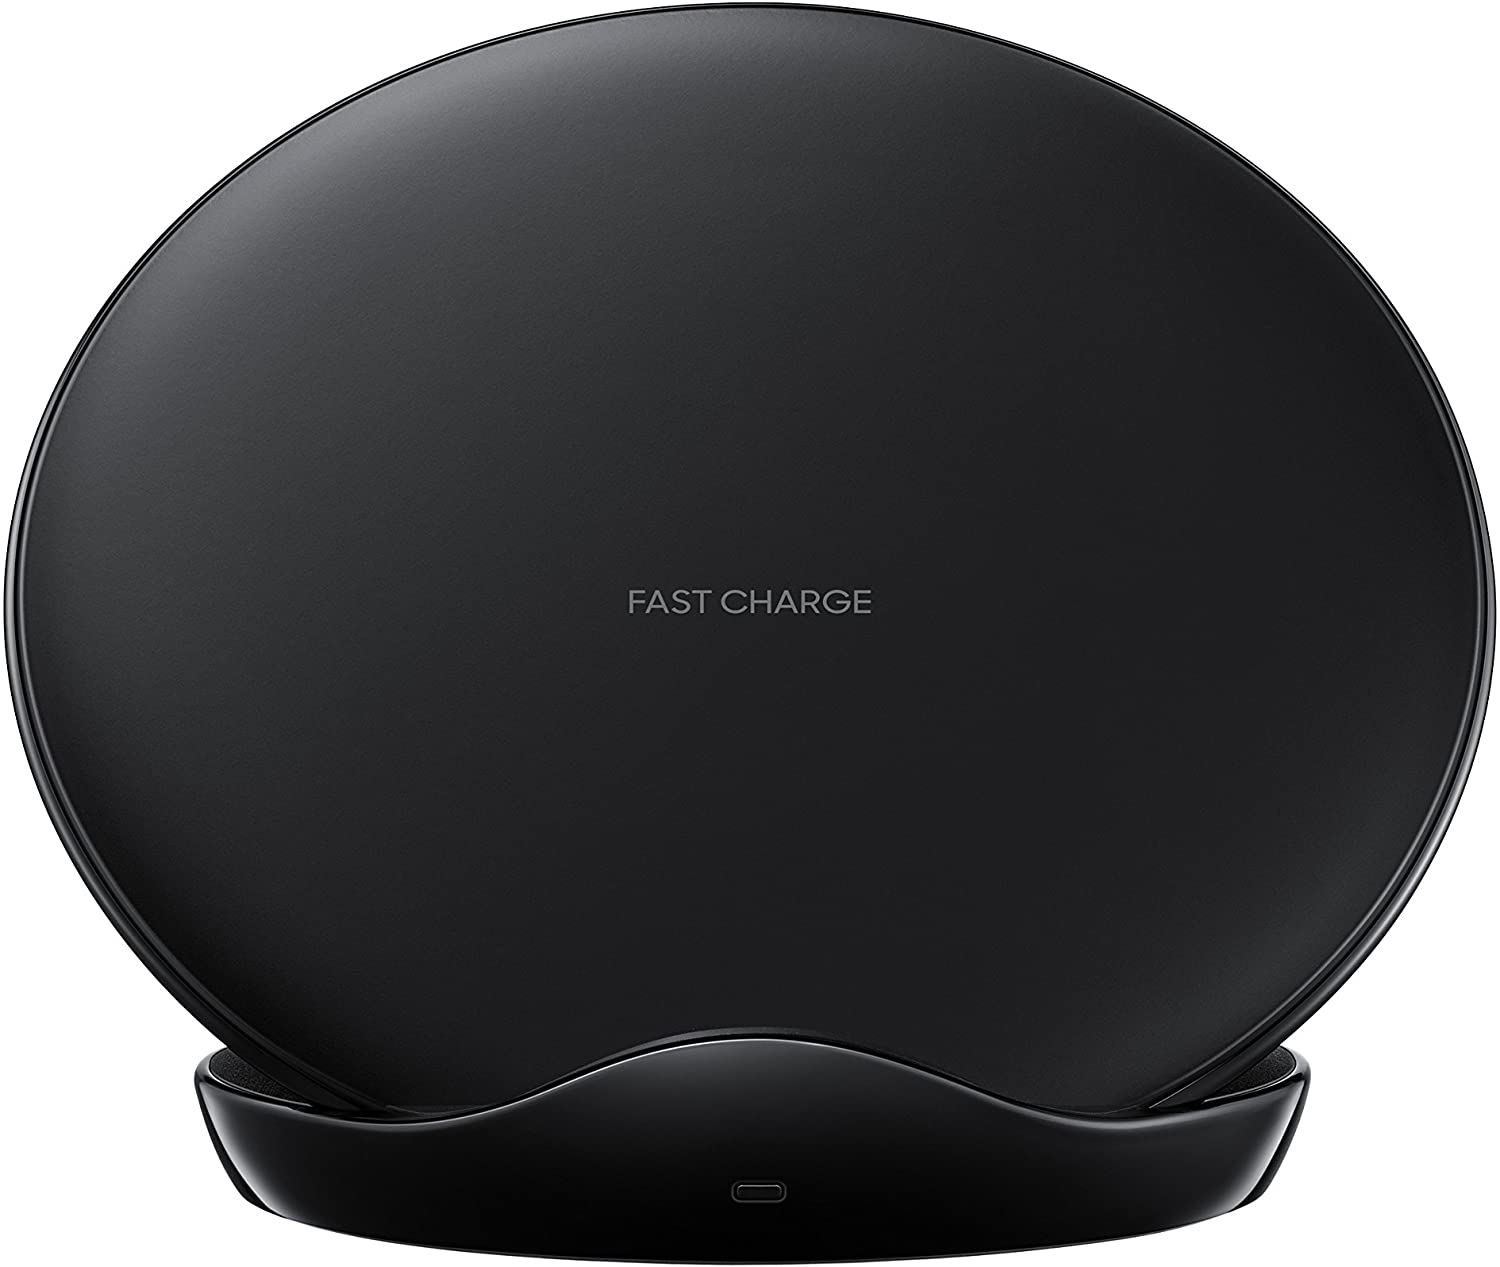 Samsung EP-N5100 Qi Certified Fast Charge Wireless Charging Stand 2018 - Black (Certified Refurbished)